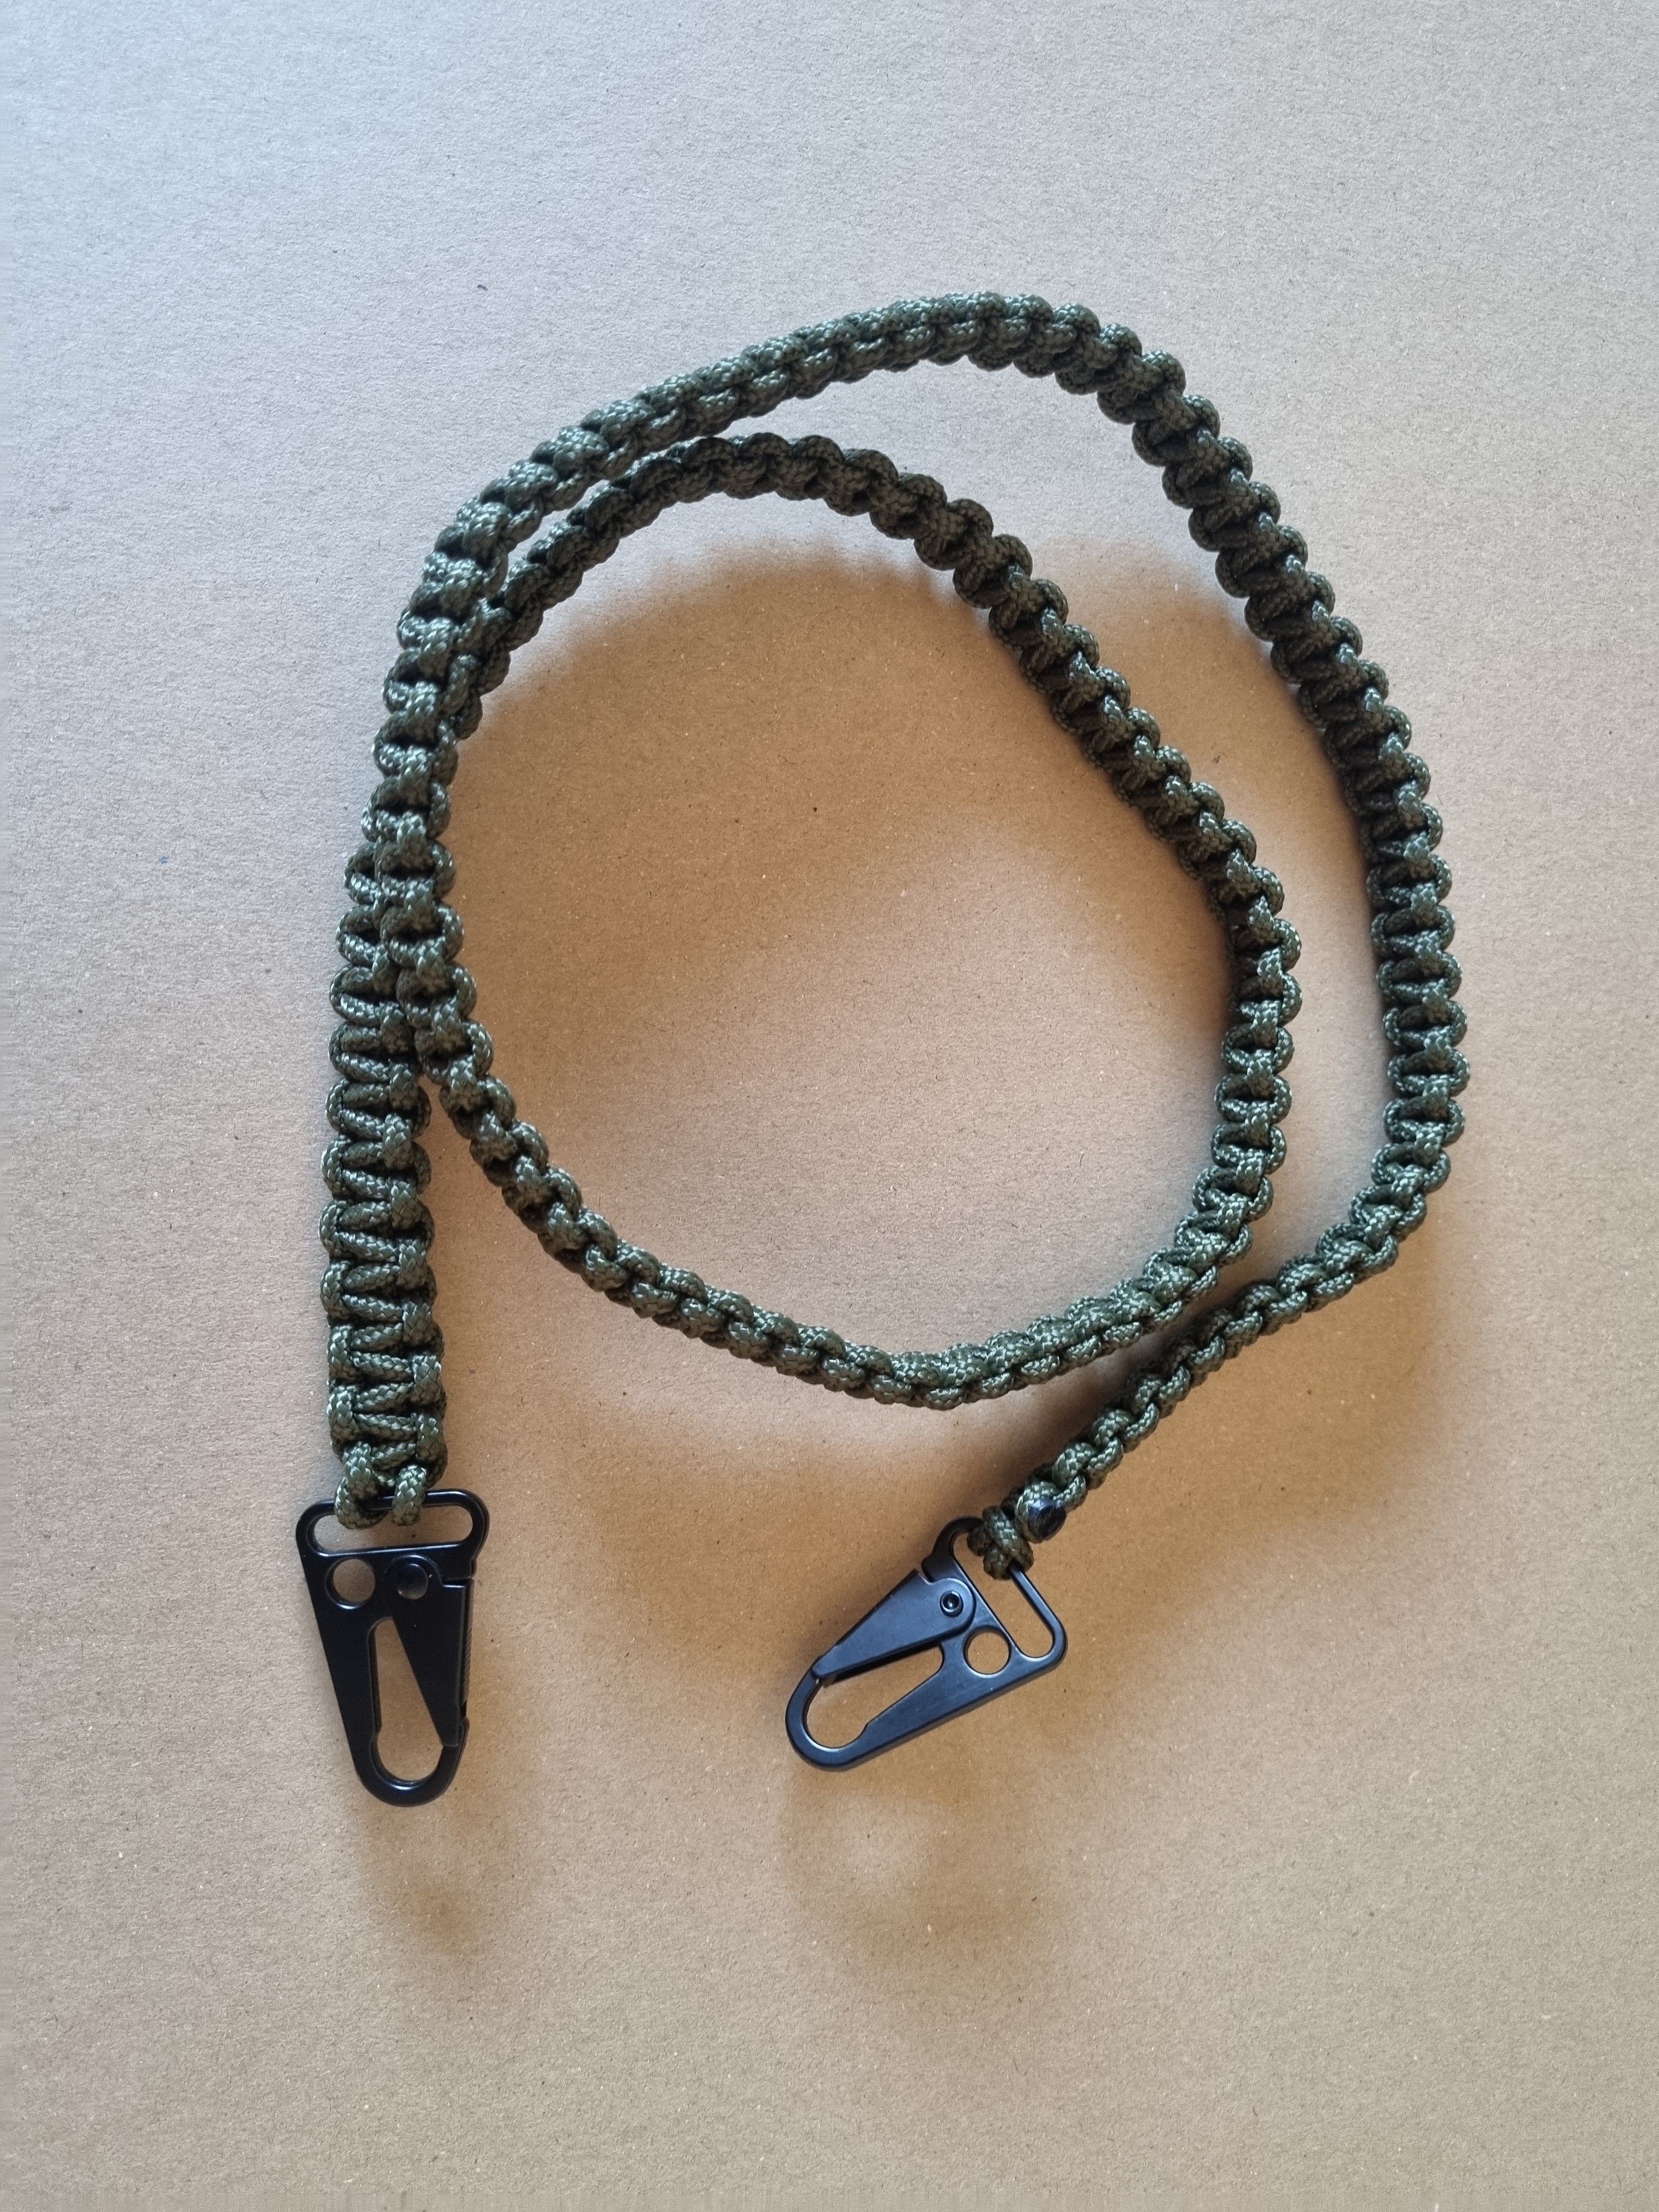 Handmade Paracord 2 Point Sling